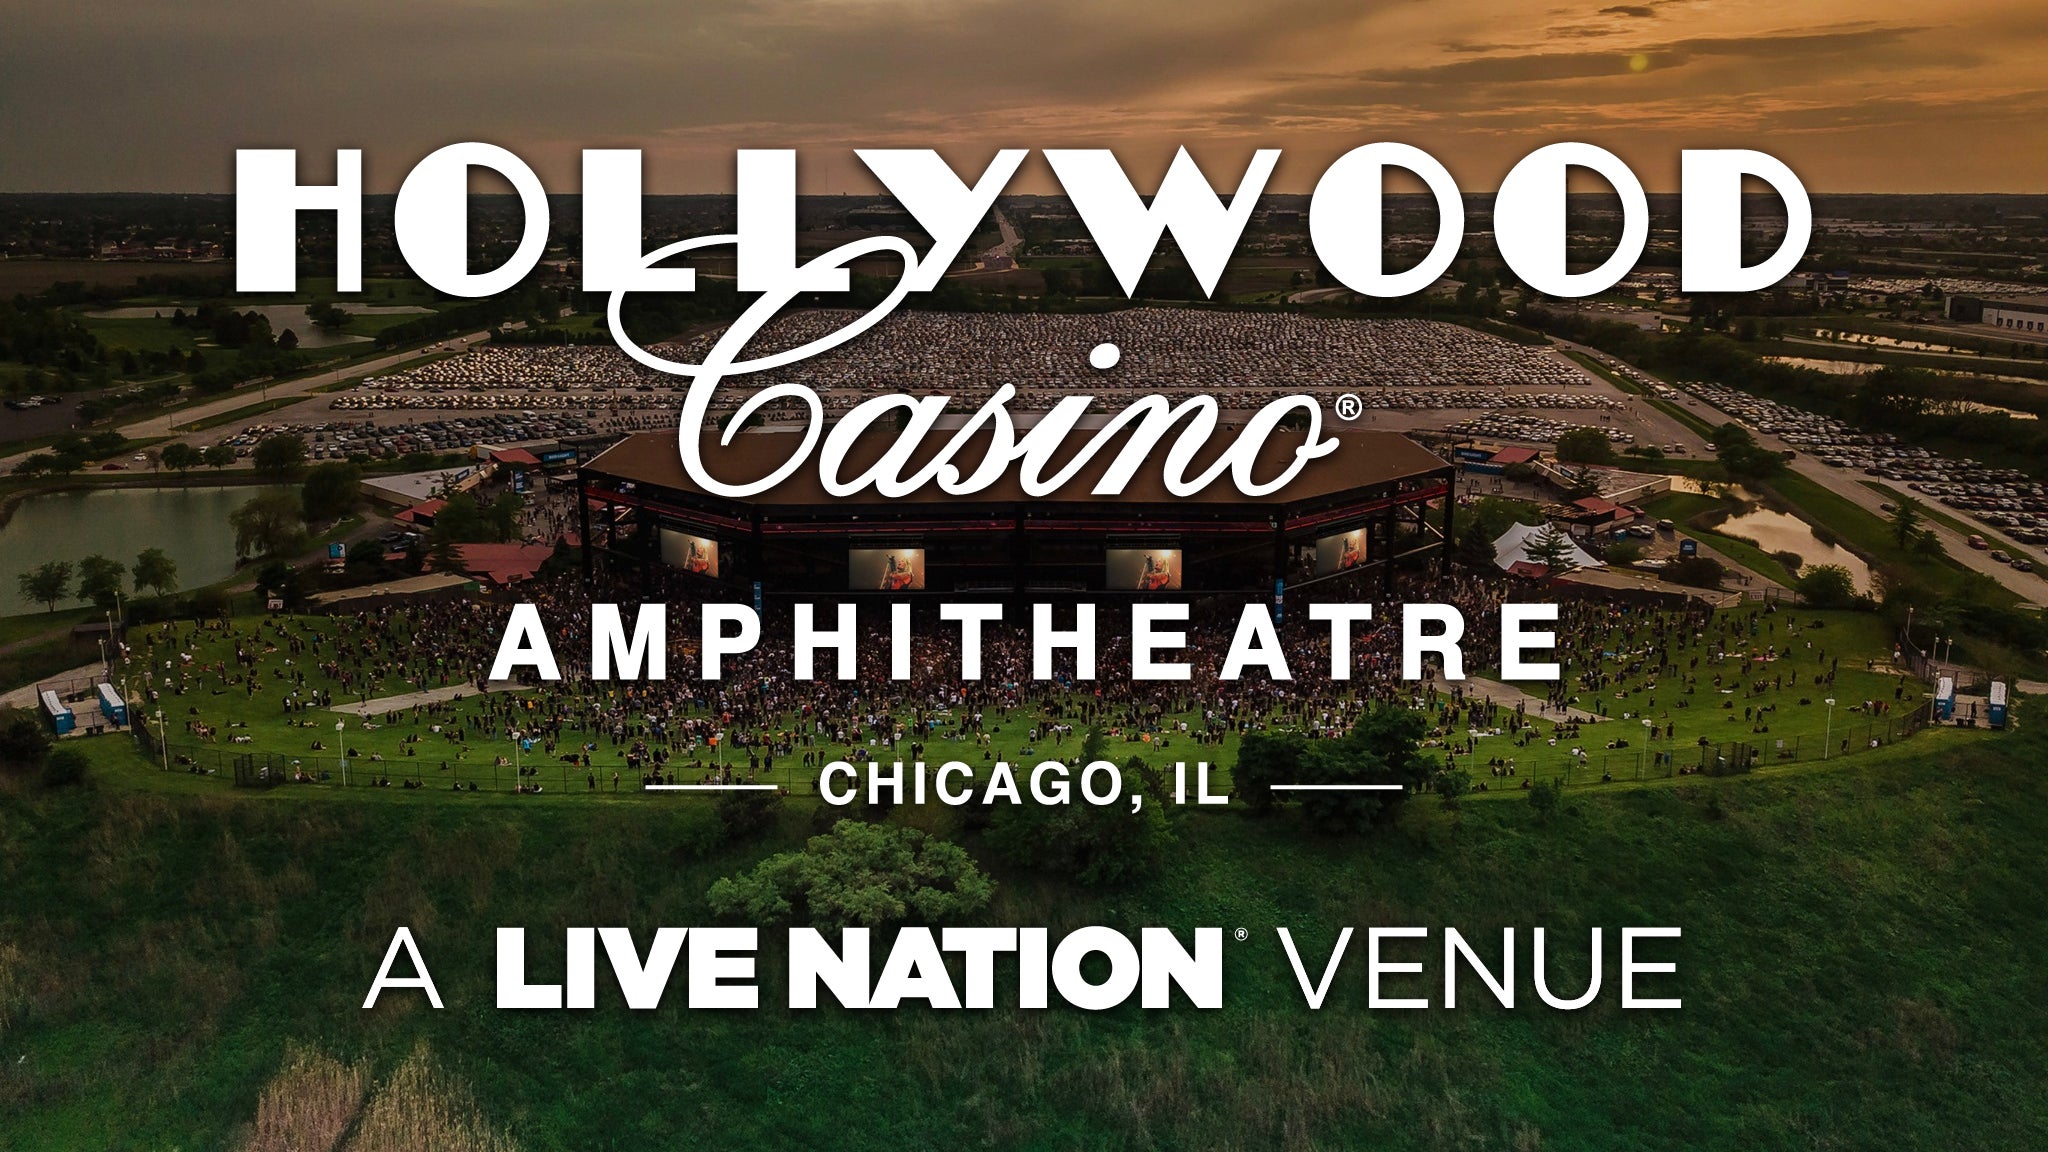 hollywood casino amphitheatre chicago parking